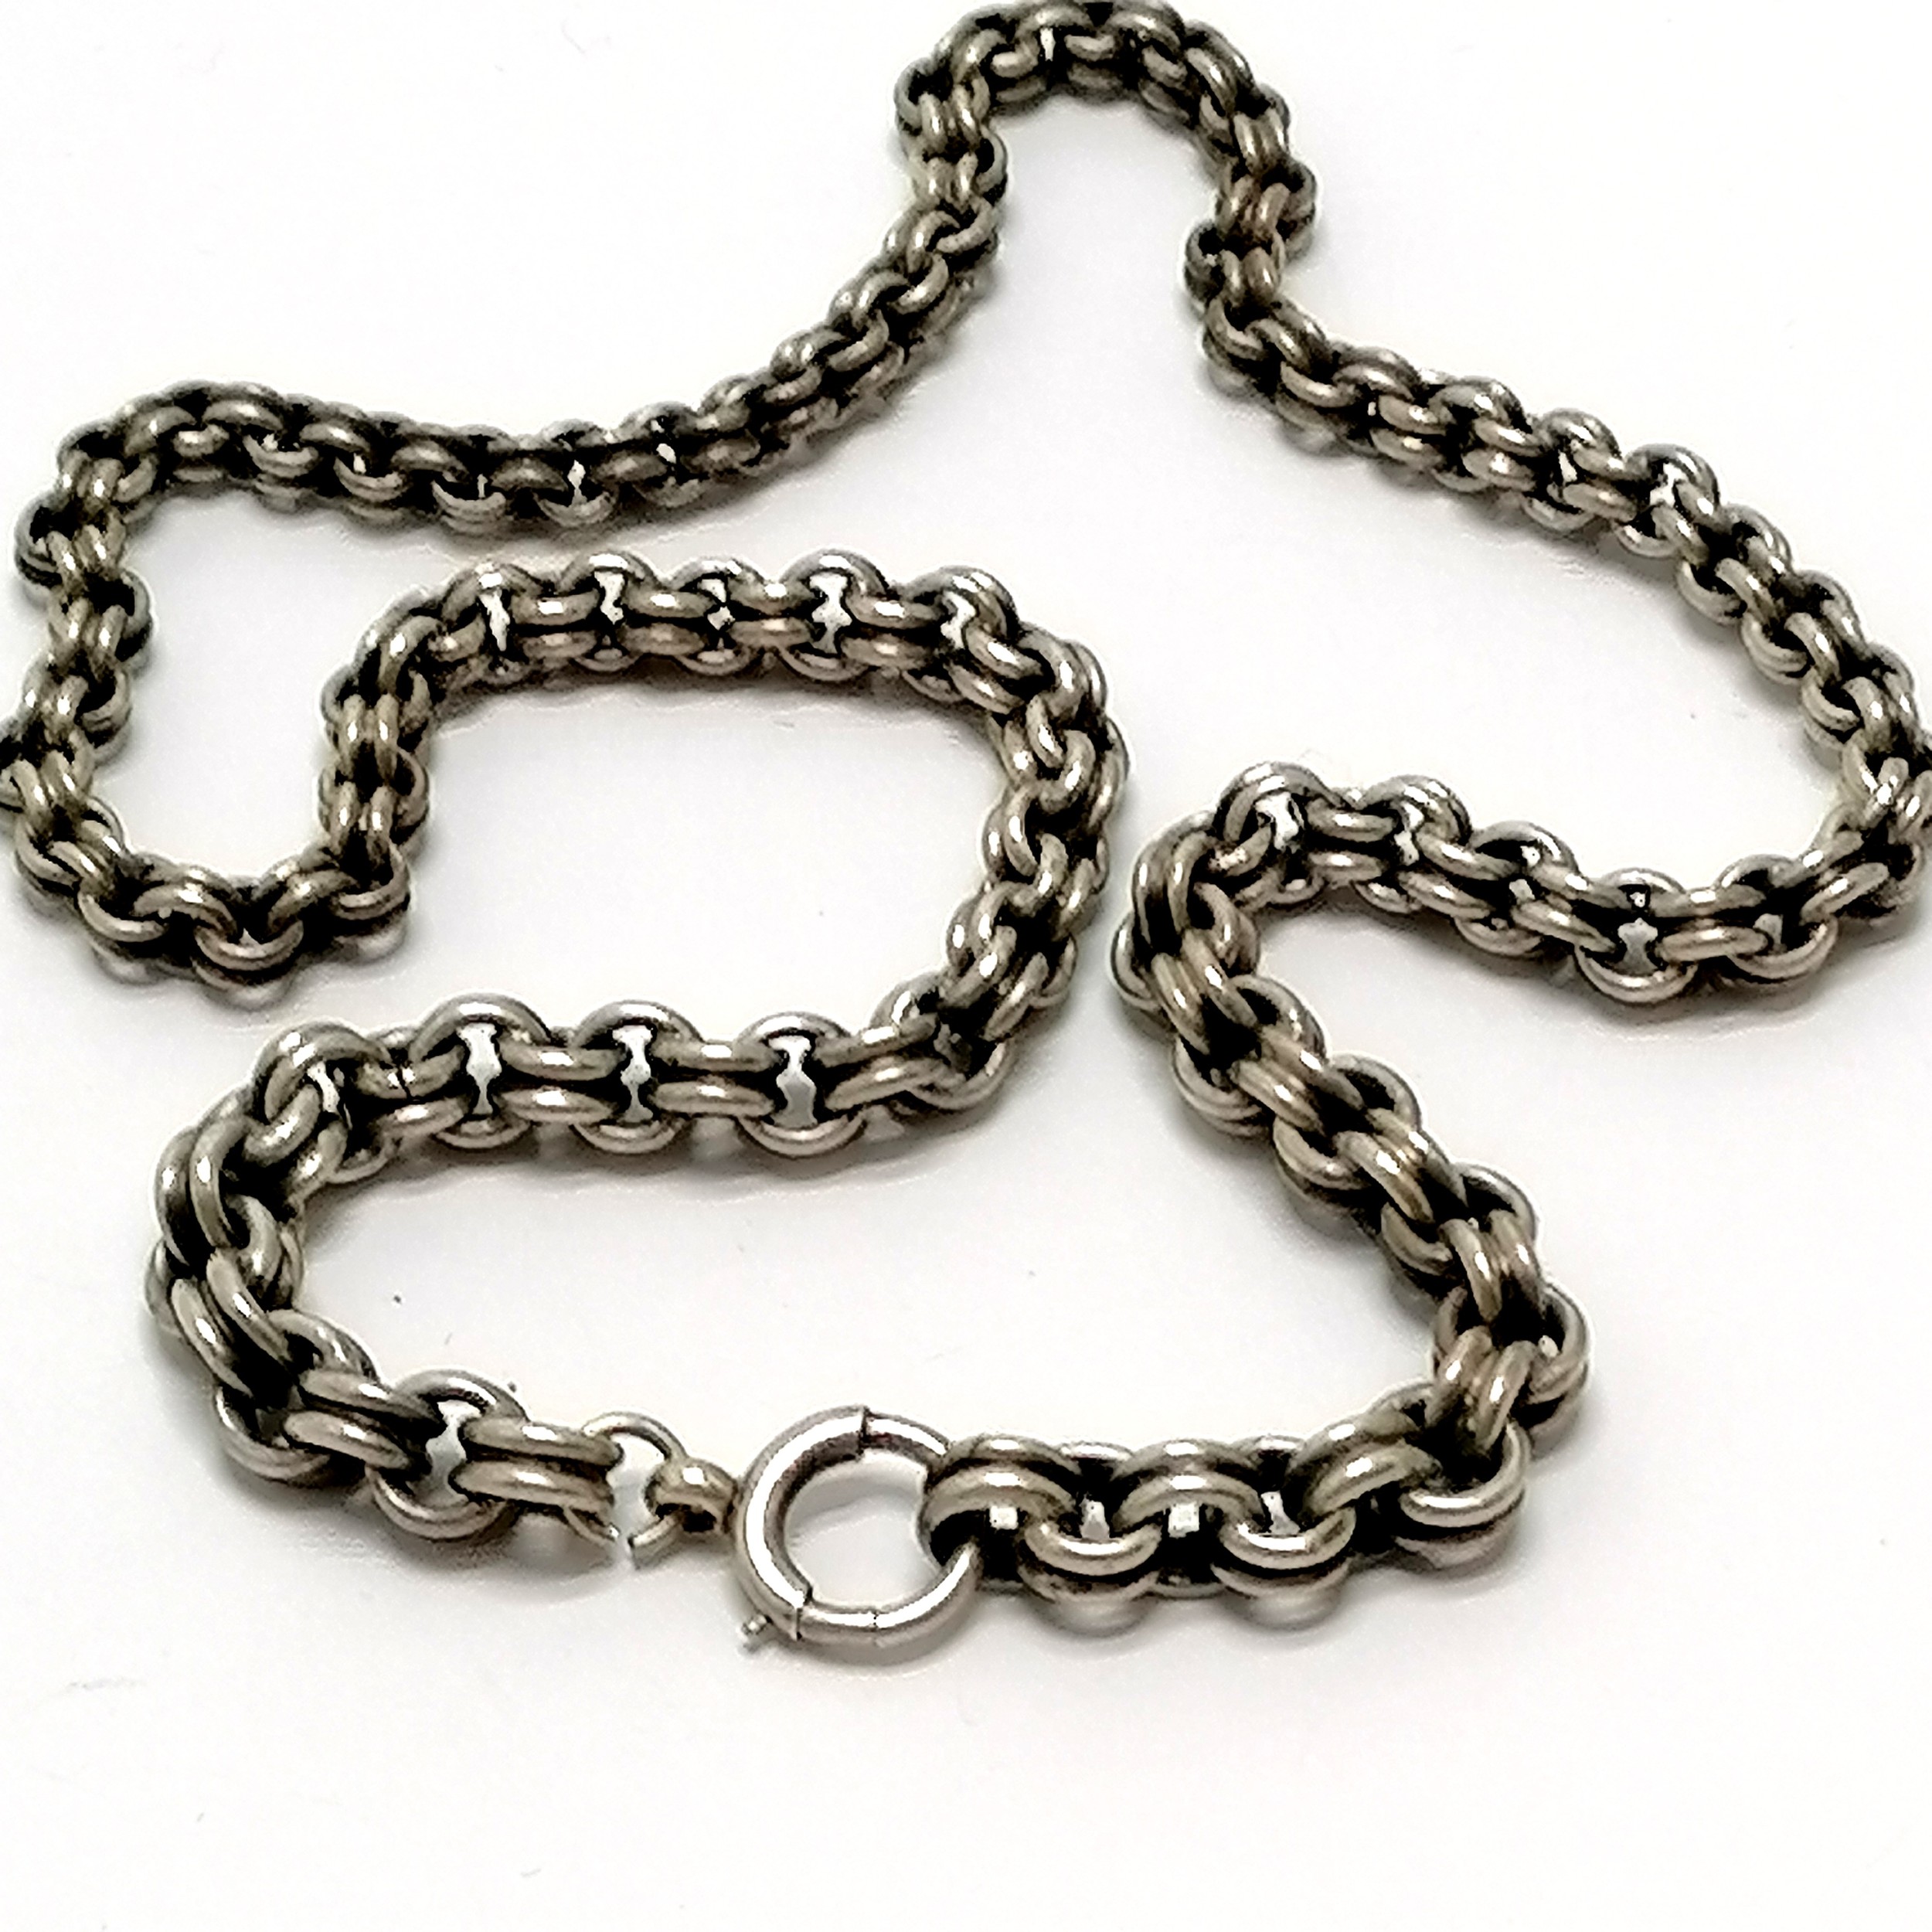 Antique Victorian unmarked silver fancy belcher link chain - 46cm & 28g with no obvious damage